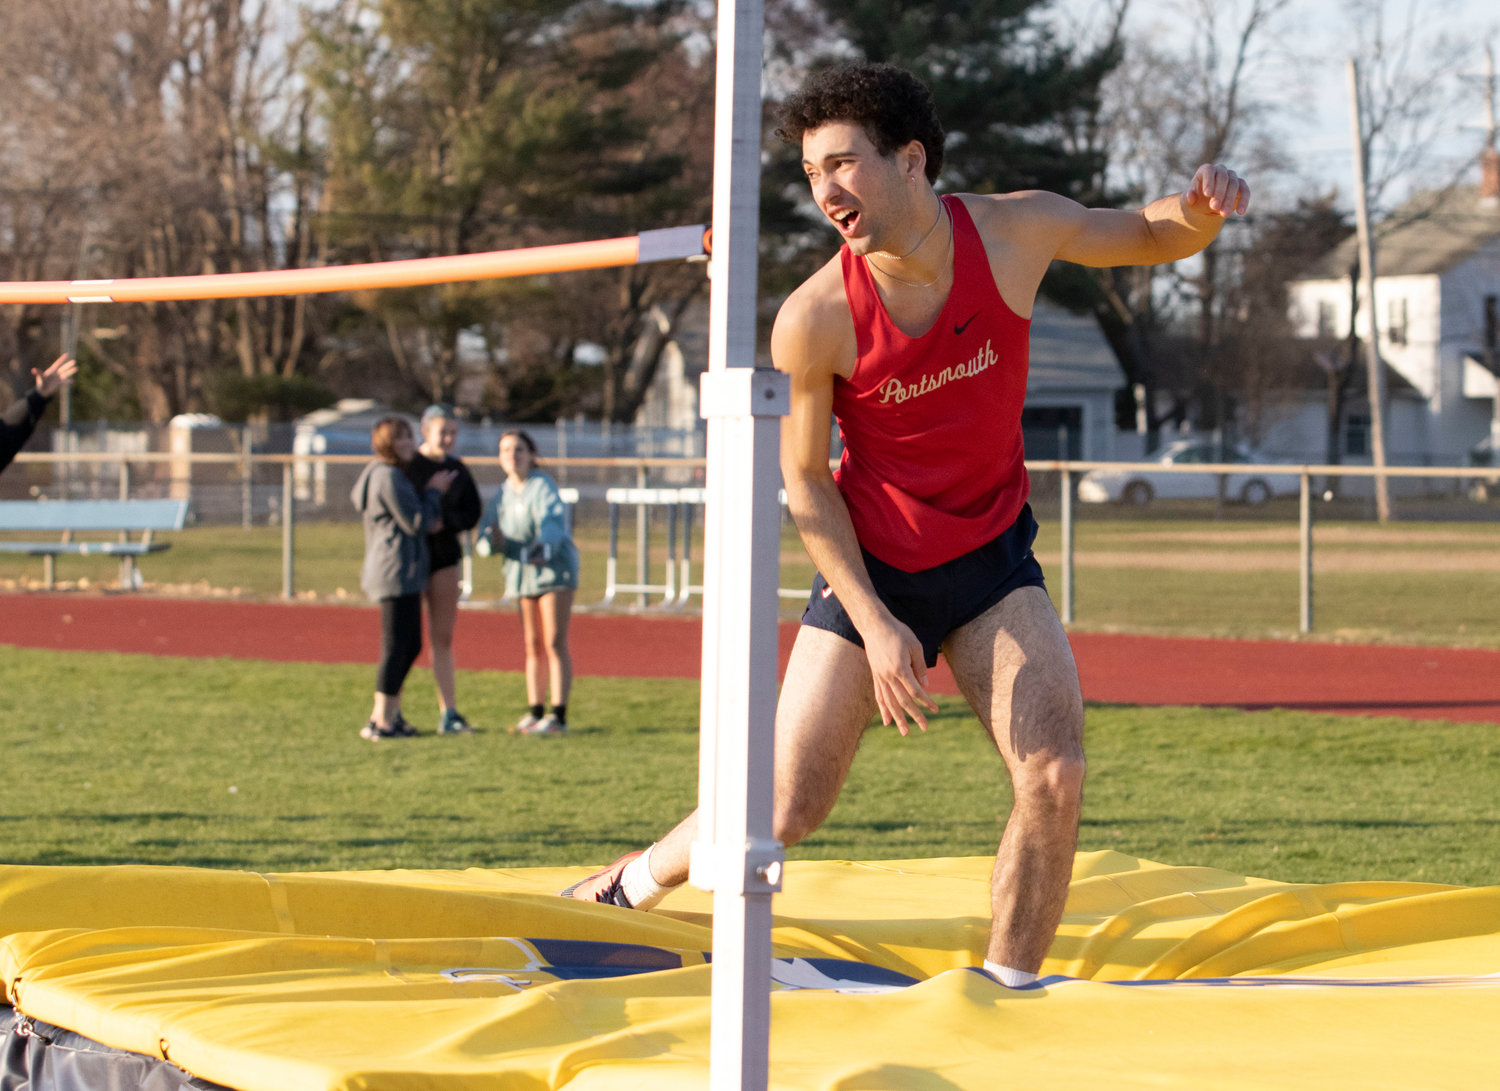 Portsmouth’s Nikolai Loyola keeps a steady eye on the bar after clearing it during the high jump competition, which he won with a best effort of 5 feet, 6 inches, during a dual track meet at Barrington High School on April 5.